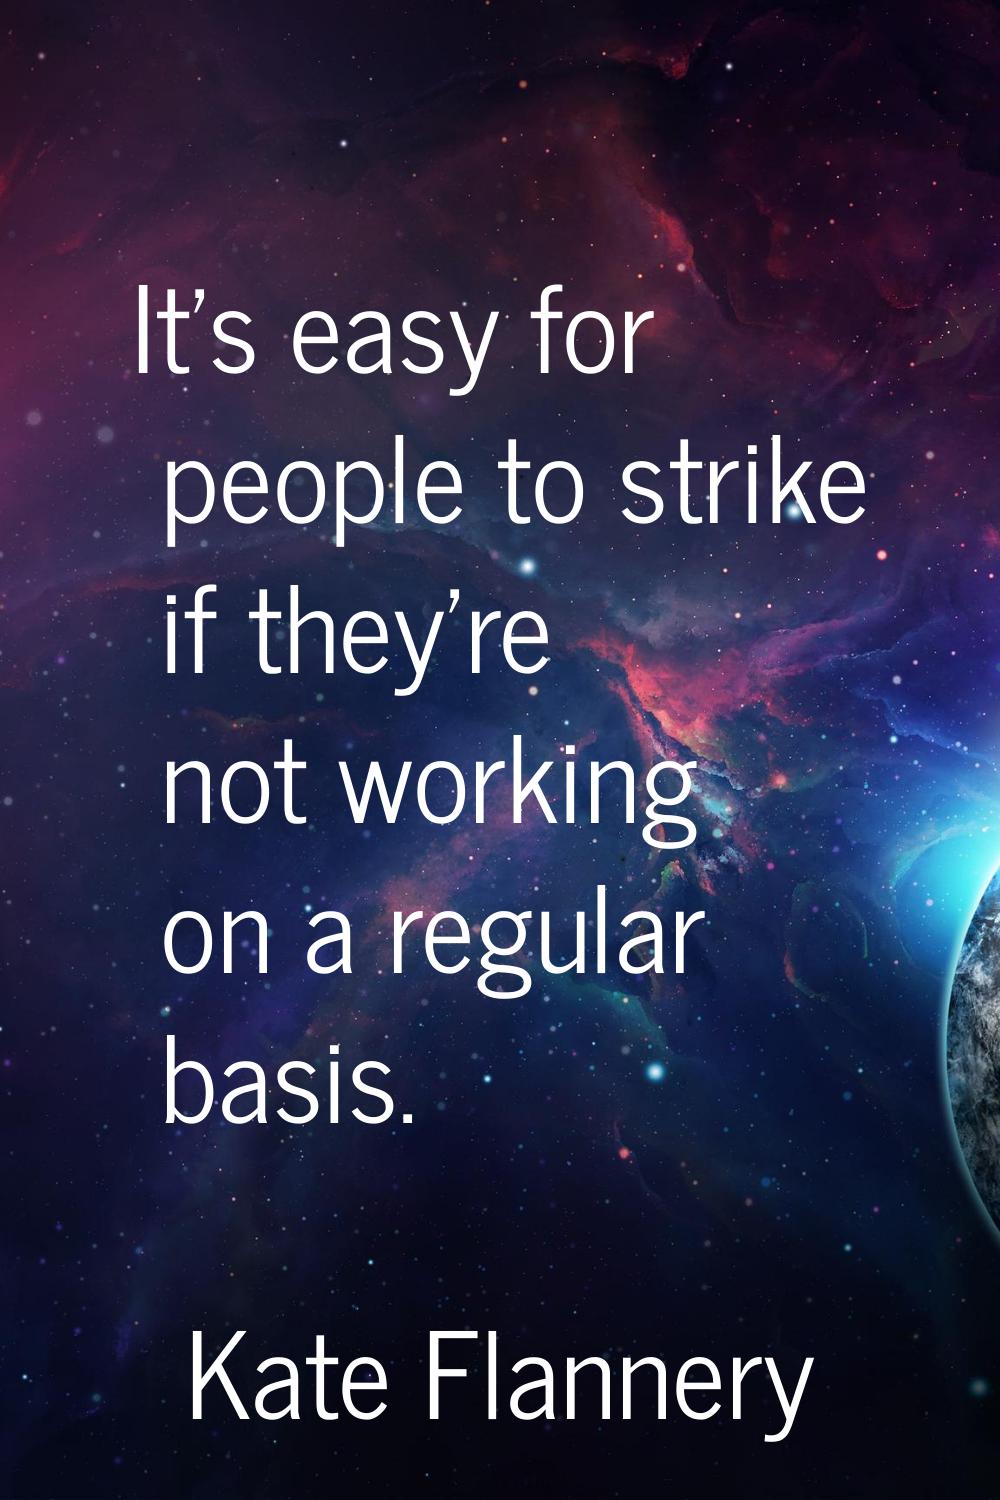 It's easy for people to strike if they're not working on a regular basis.